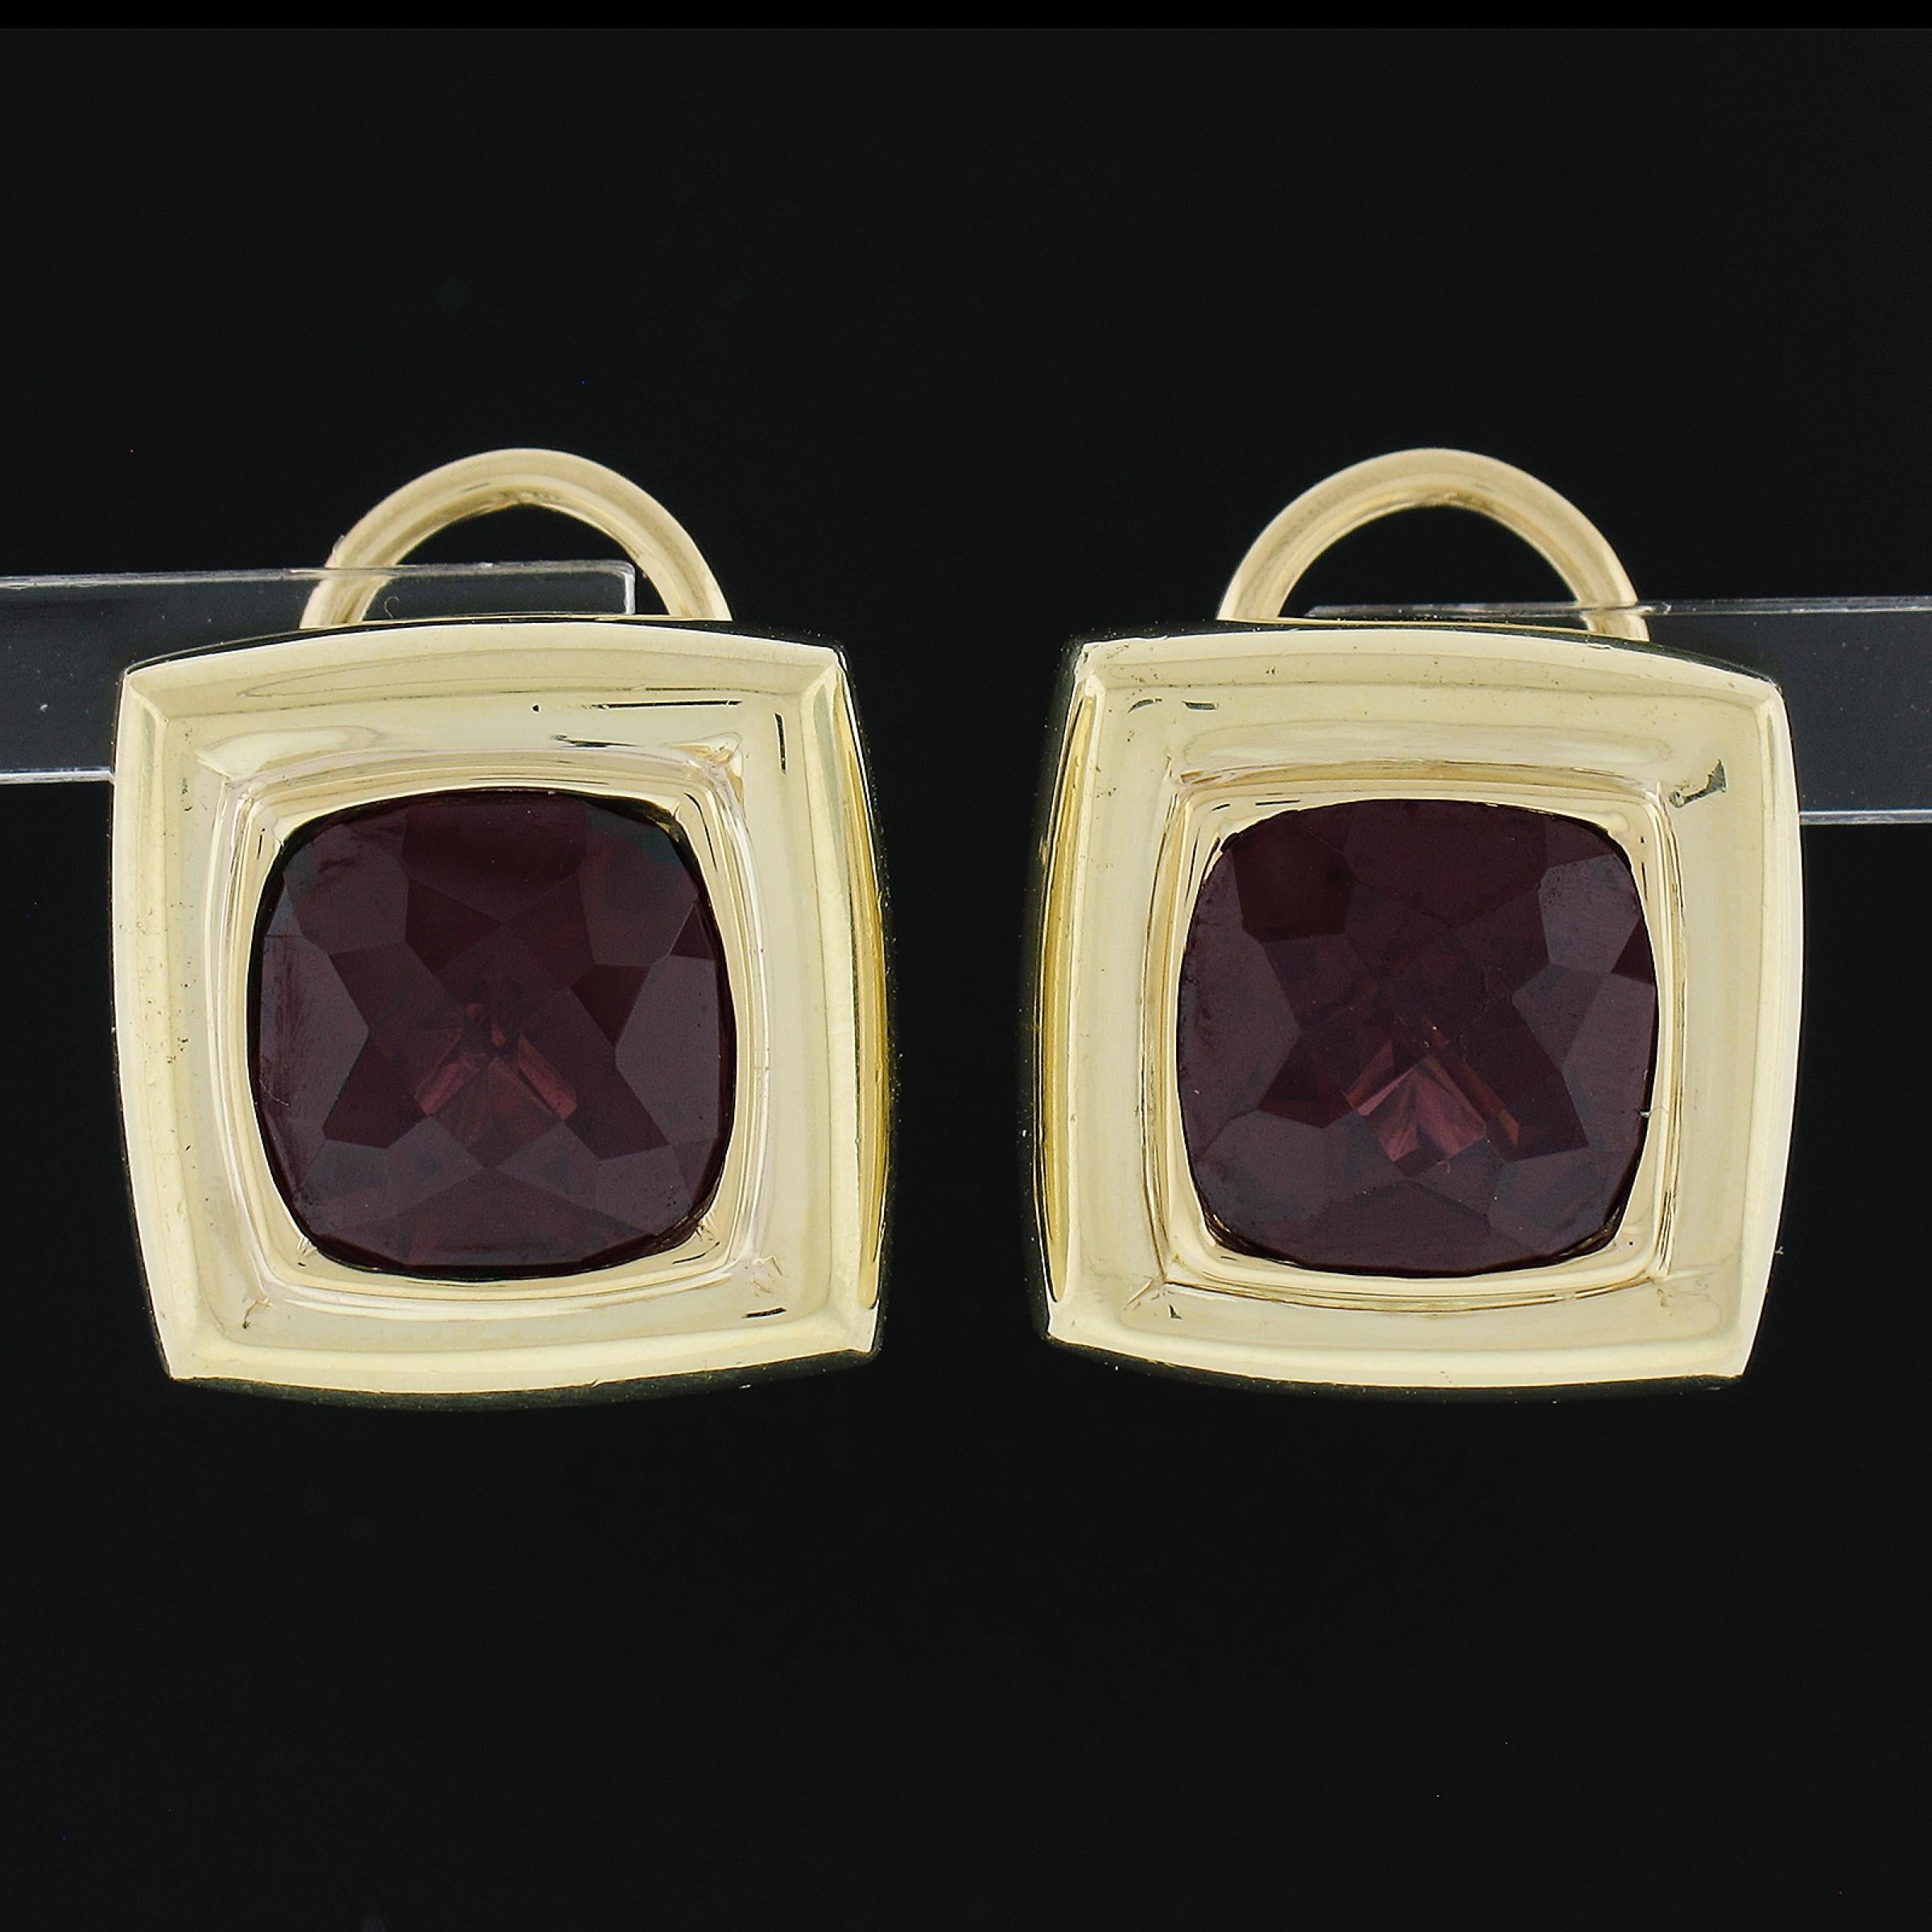 --Stone(s):--
(2) Natural Genuine Garnets - Checkerboard Cushion Cut - Bezel Set - Pure Red Color - 10ctw (approx. - based on GIA measurements)
Total Carat Weight:	10 (approx.)

Material: Solid 18k Yellow Gold
Weight: 19.89 Grams
Backing:	Post Backs